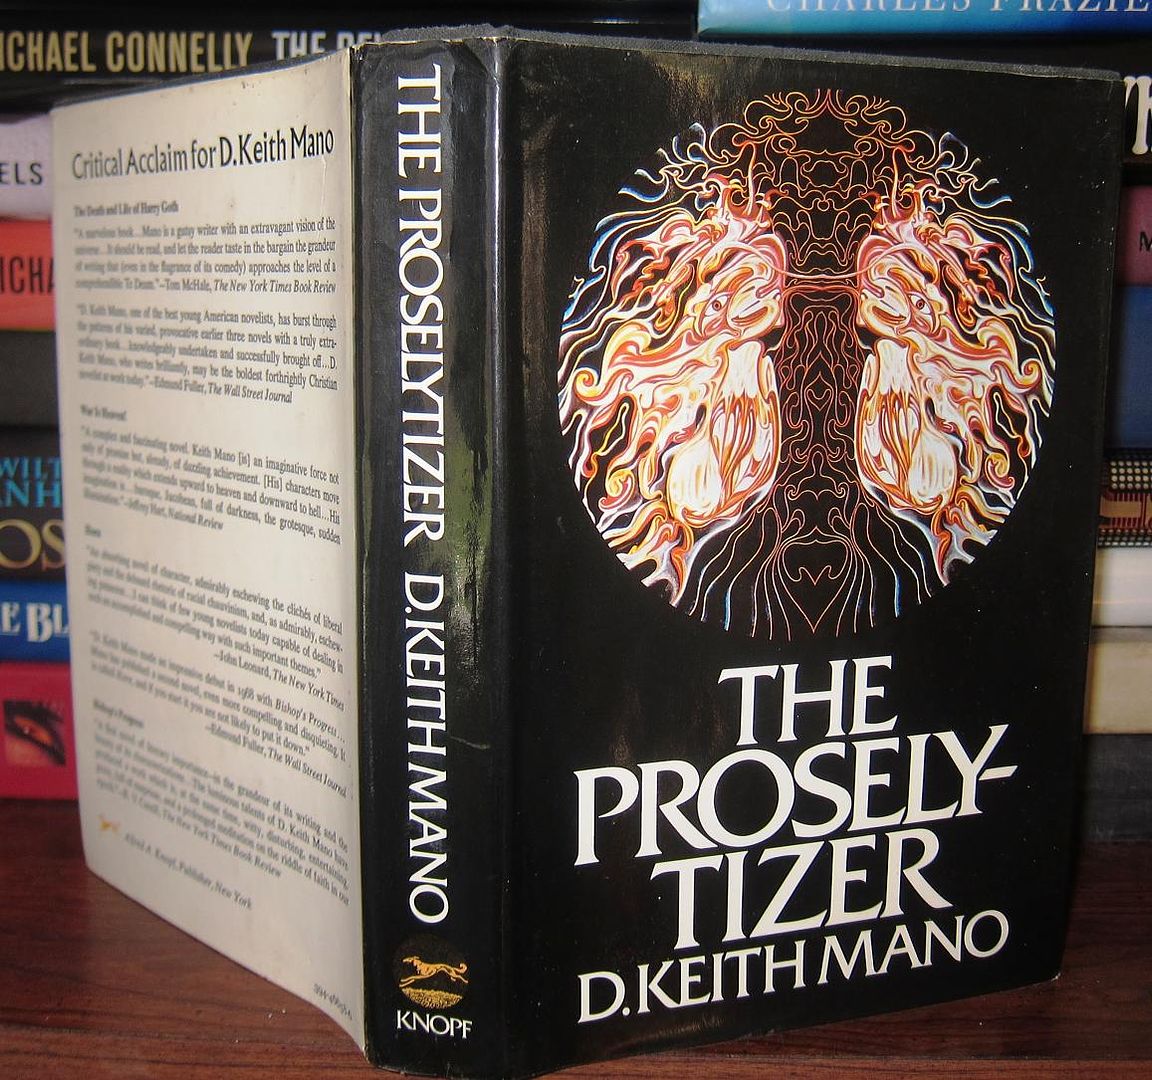 MANO, D. KEITH - The Proselytizer